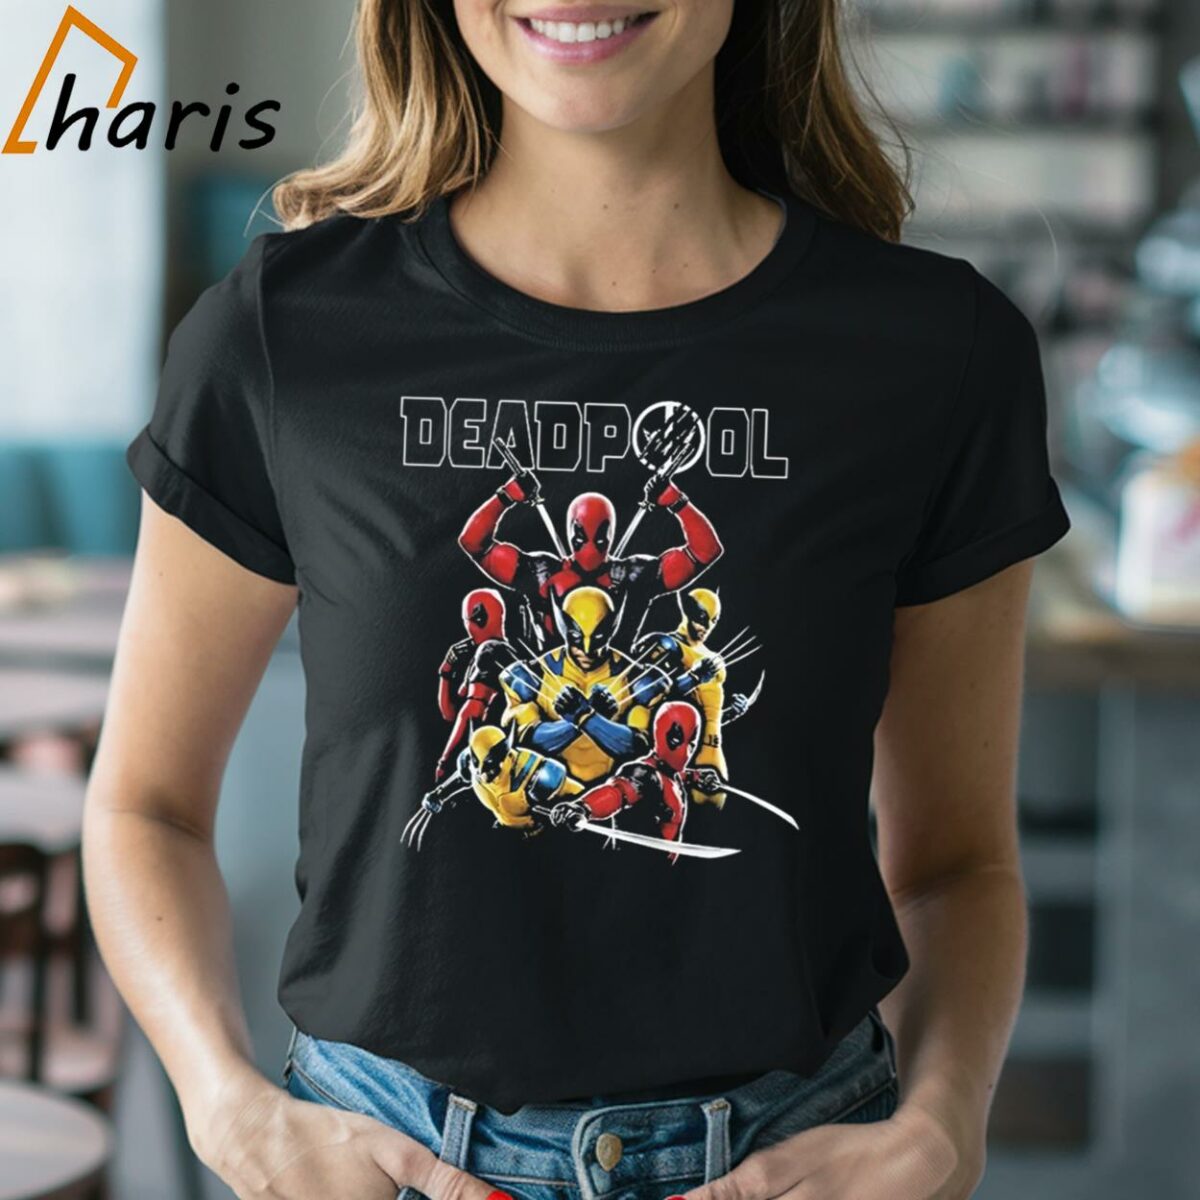 Promotional Art For Deadpool And Wolverine T Shirt 2 Shirt